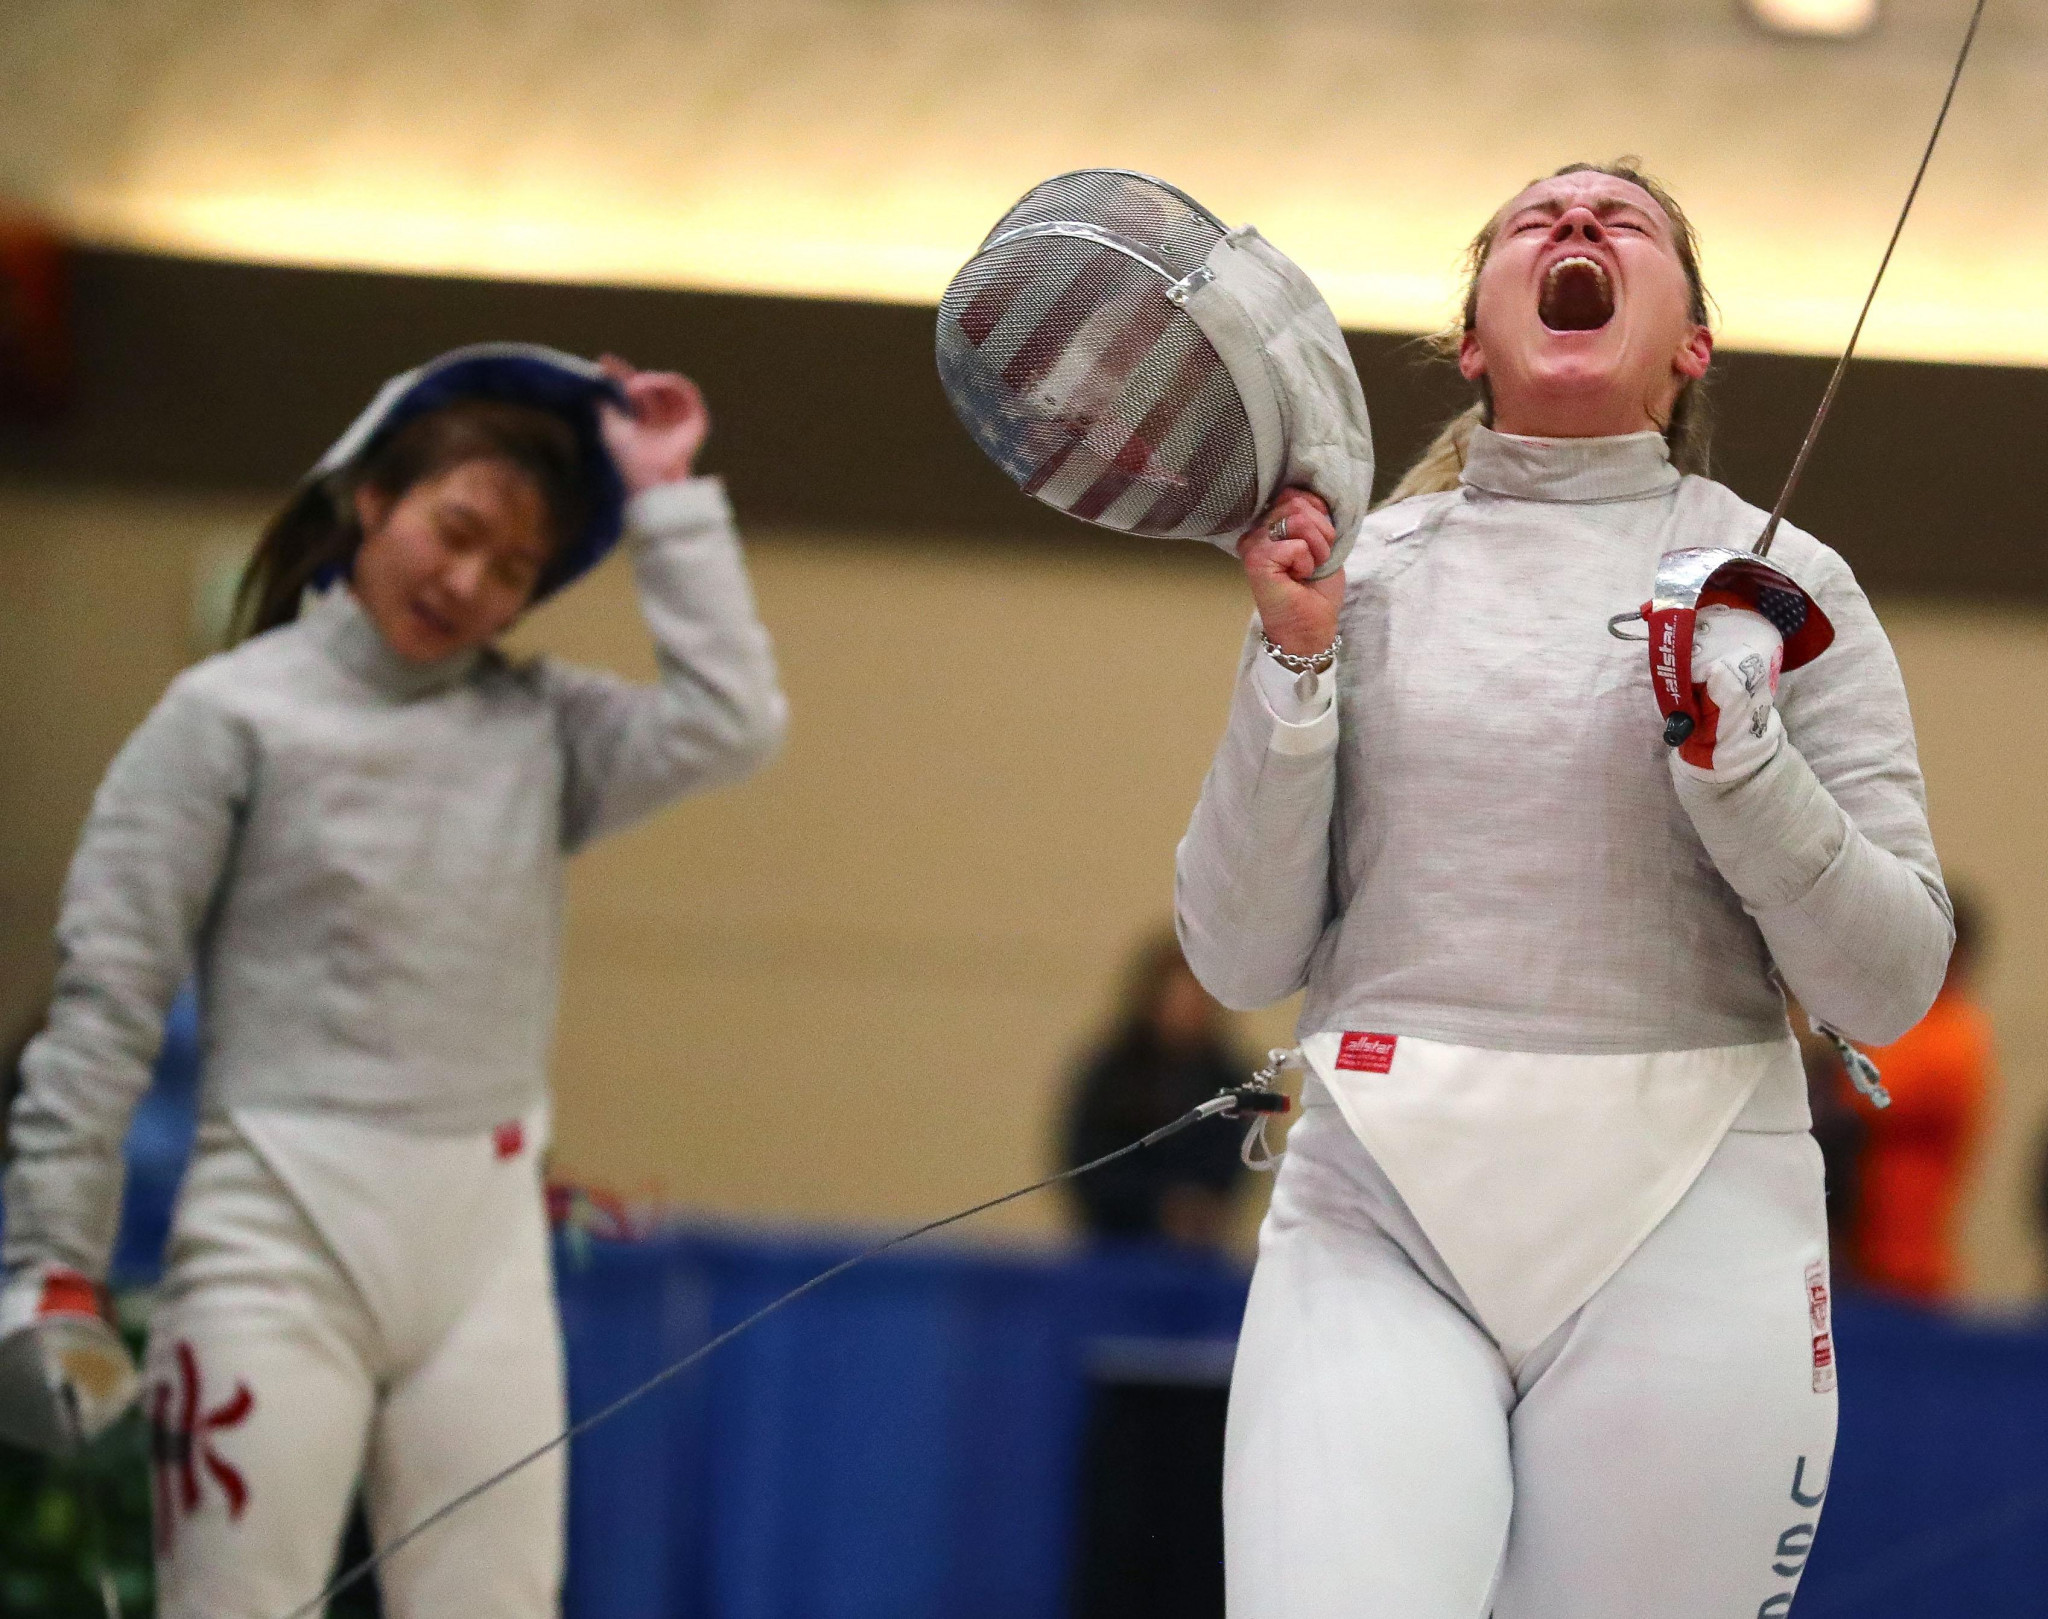 Dagmara Wozniak had a profitable weekend at the Baltimore Sabre World Cup where she finished fifth in the individual competition and helped the home side to finish fifth in the team event ©Getty Images